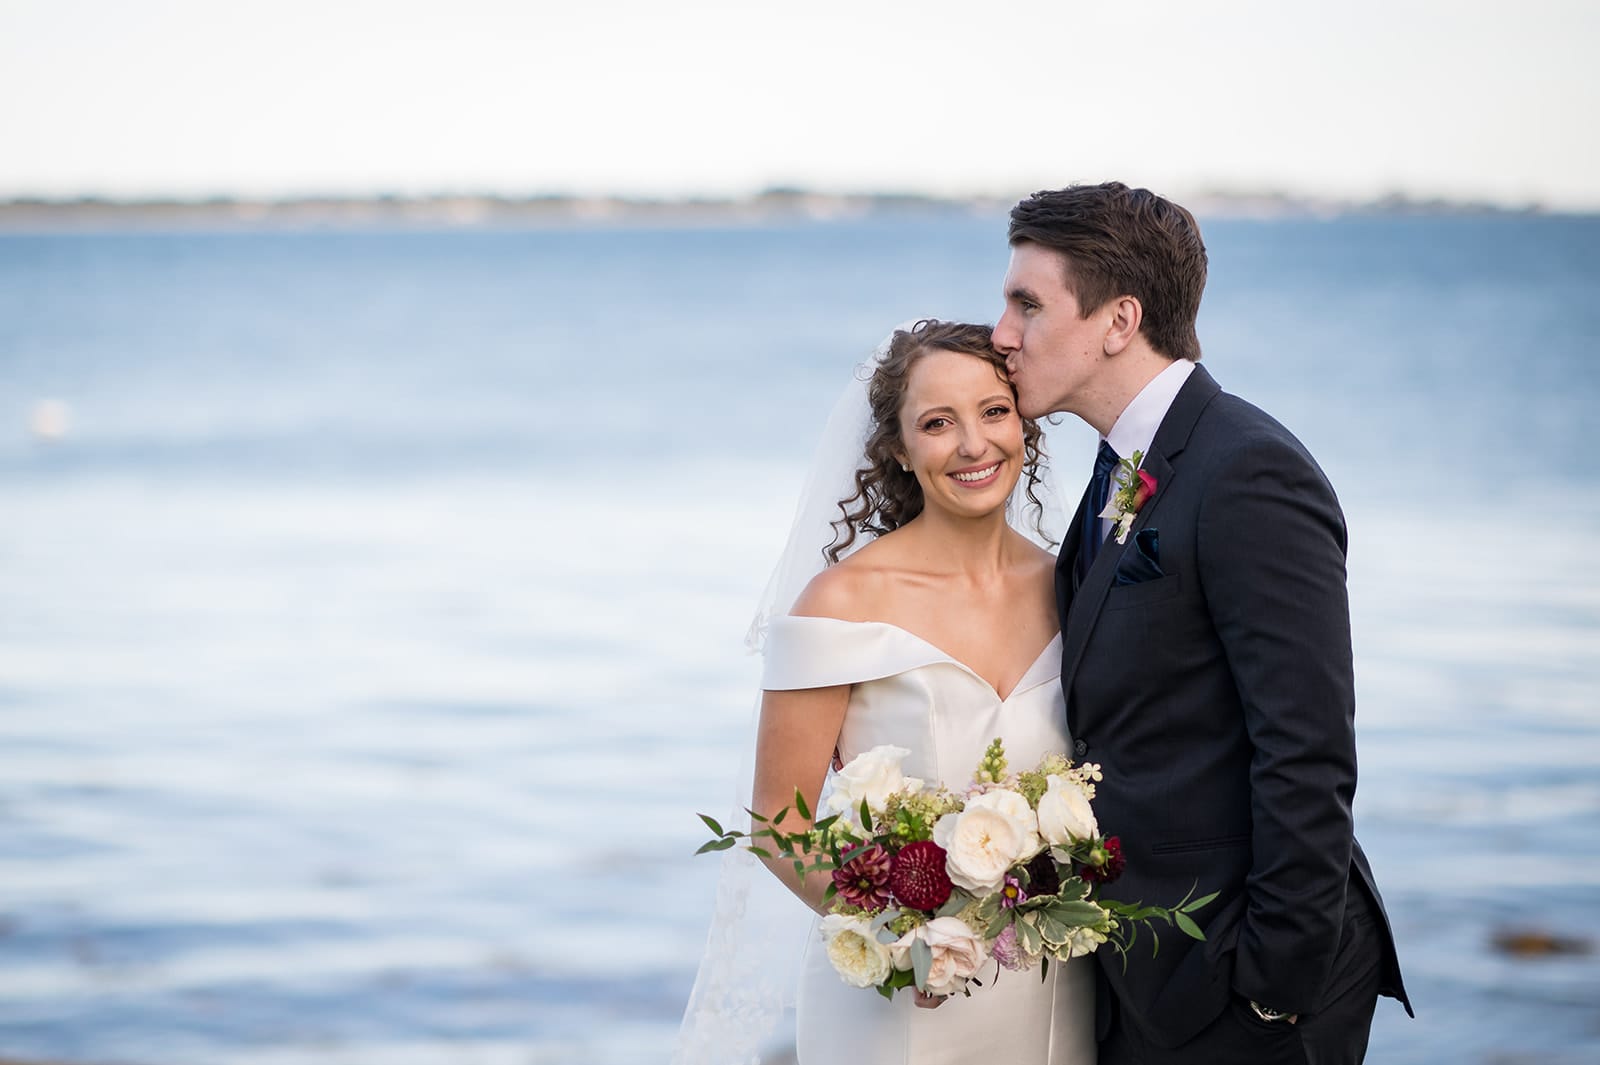 Bride and groom together in front of the ocean at their Stonington, CT wedding captured by Teresa Johnson Photography